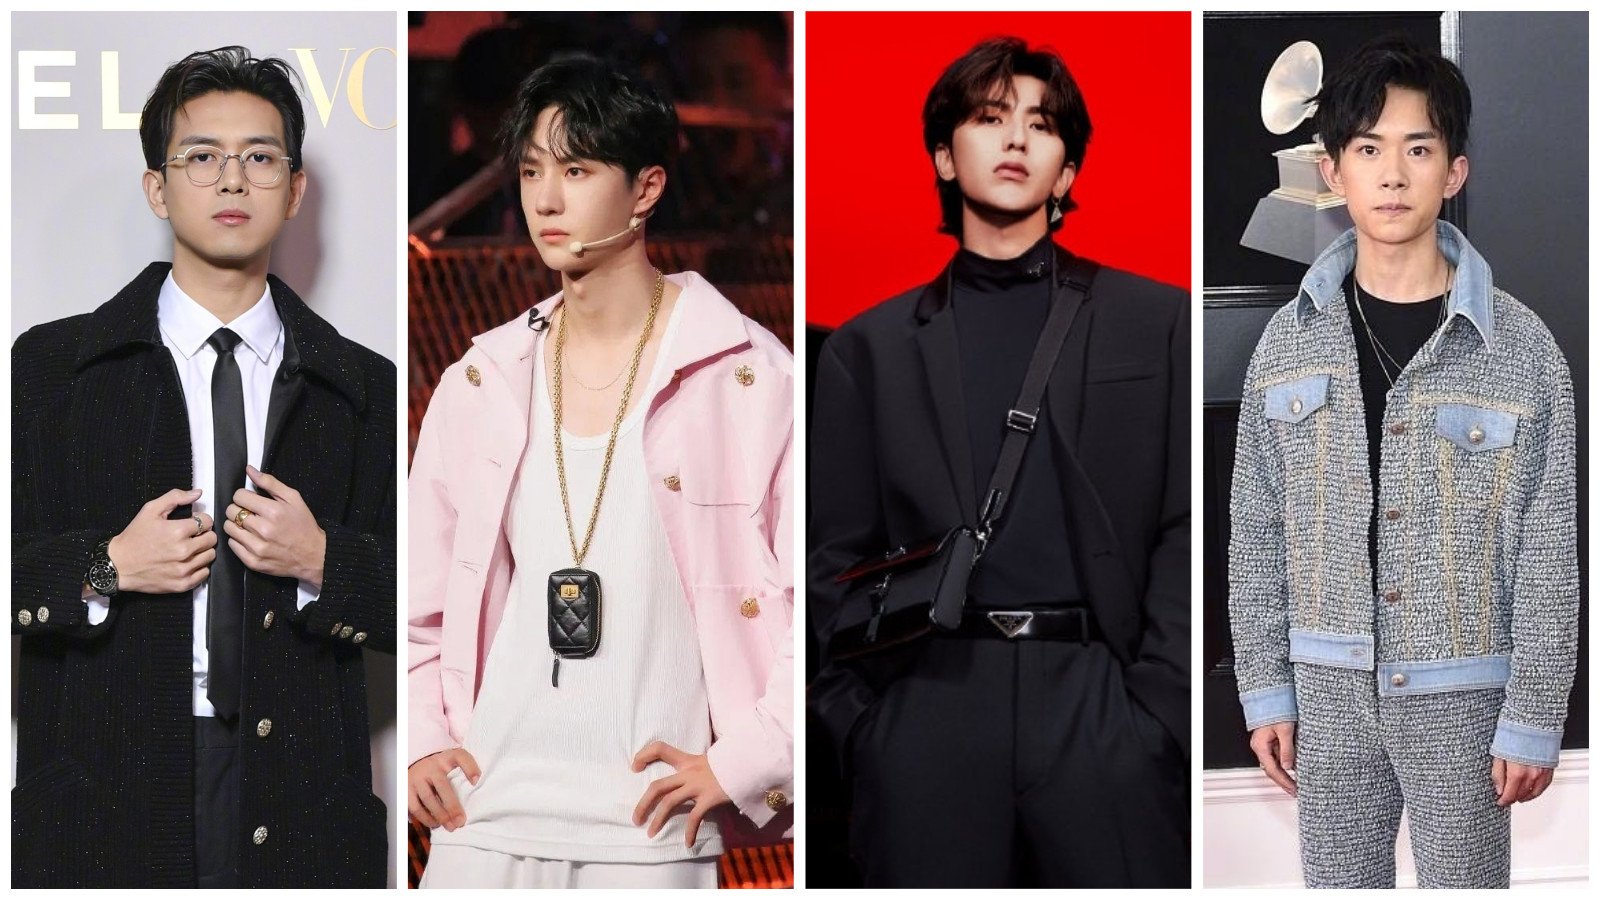 Chinese stars like Li Xian, Wang Yibo, Cai Xukun and Jackson Yee are challenging gender and fashion boundaries by wearing womenswear, but can China’s newest fashion trend take hold amid pervading cultural norms? Photo:@橘子娱乐, @这就是街舞, @PRADA普拉达, @TFBOYS-易烊千玺/Weibo